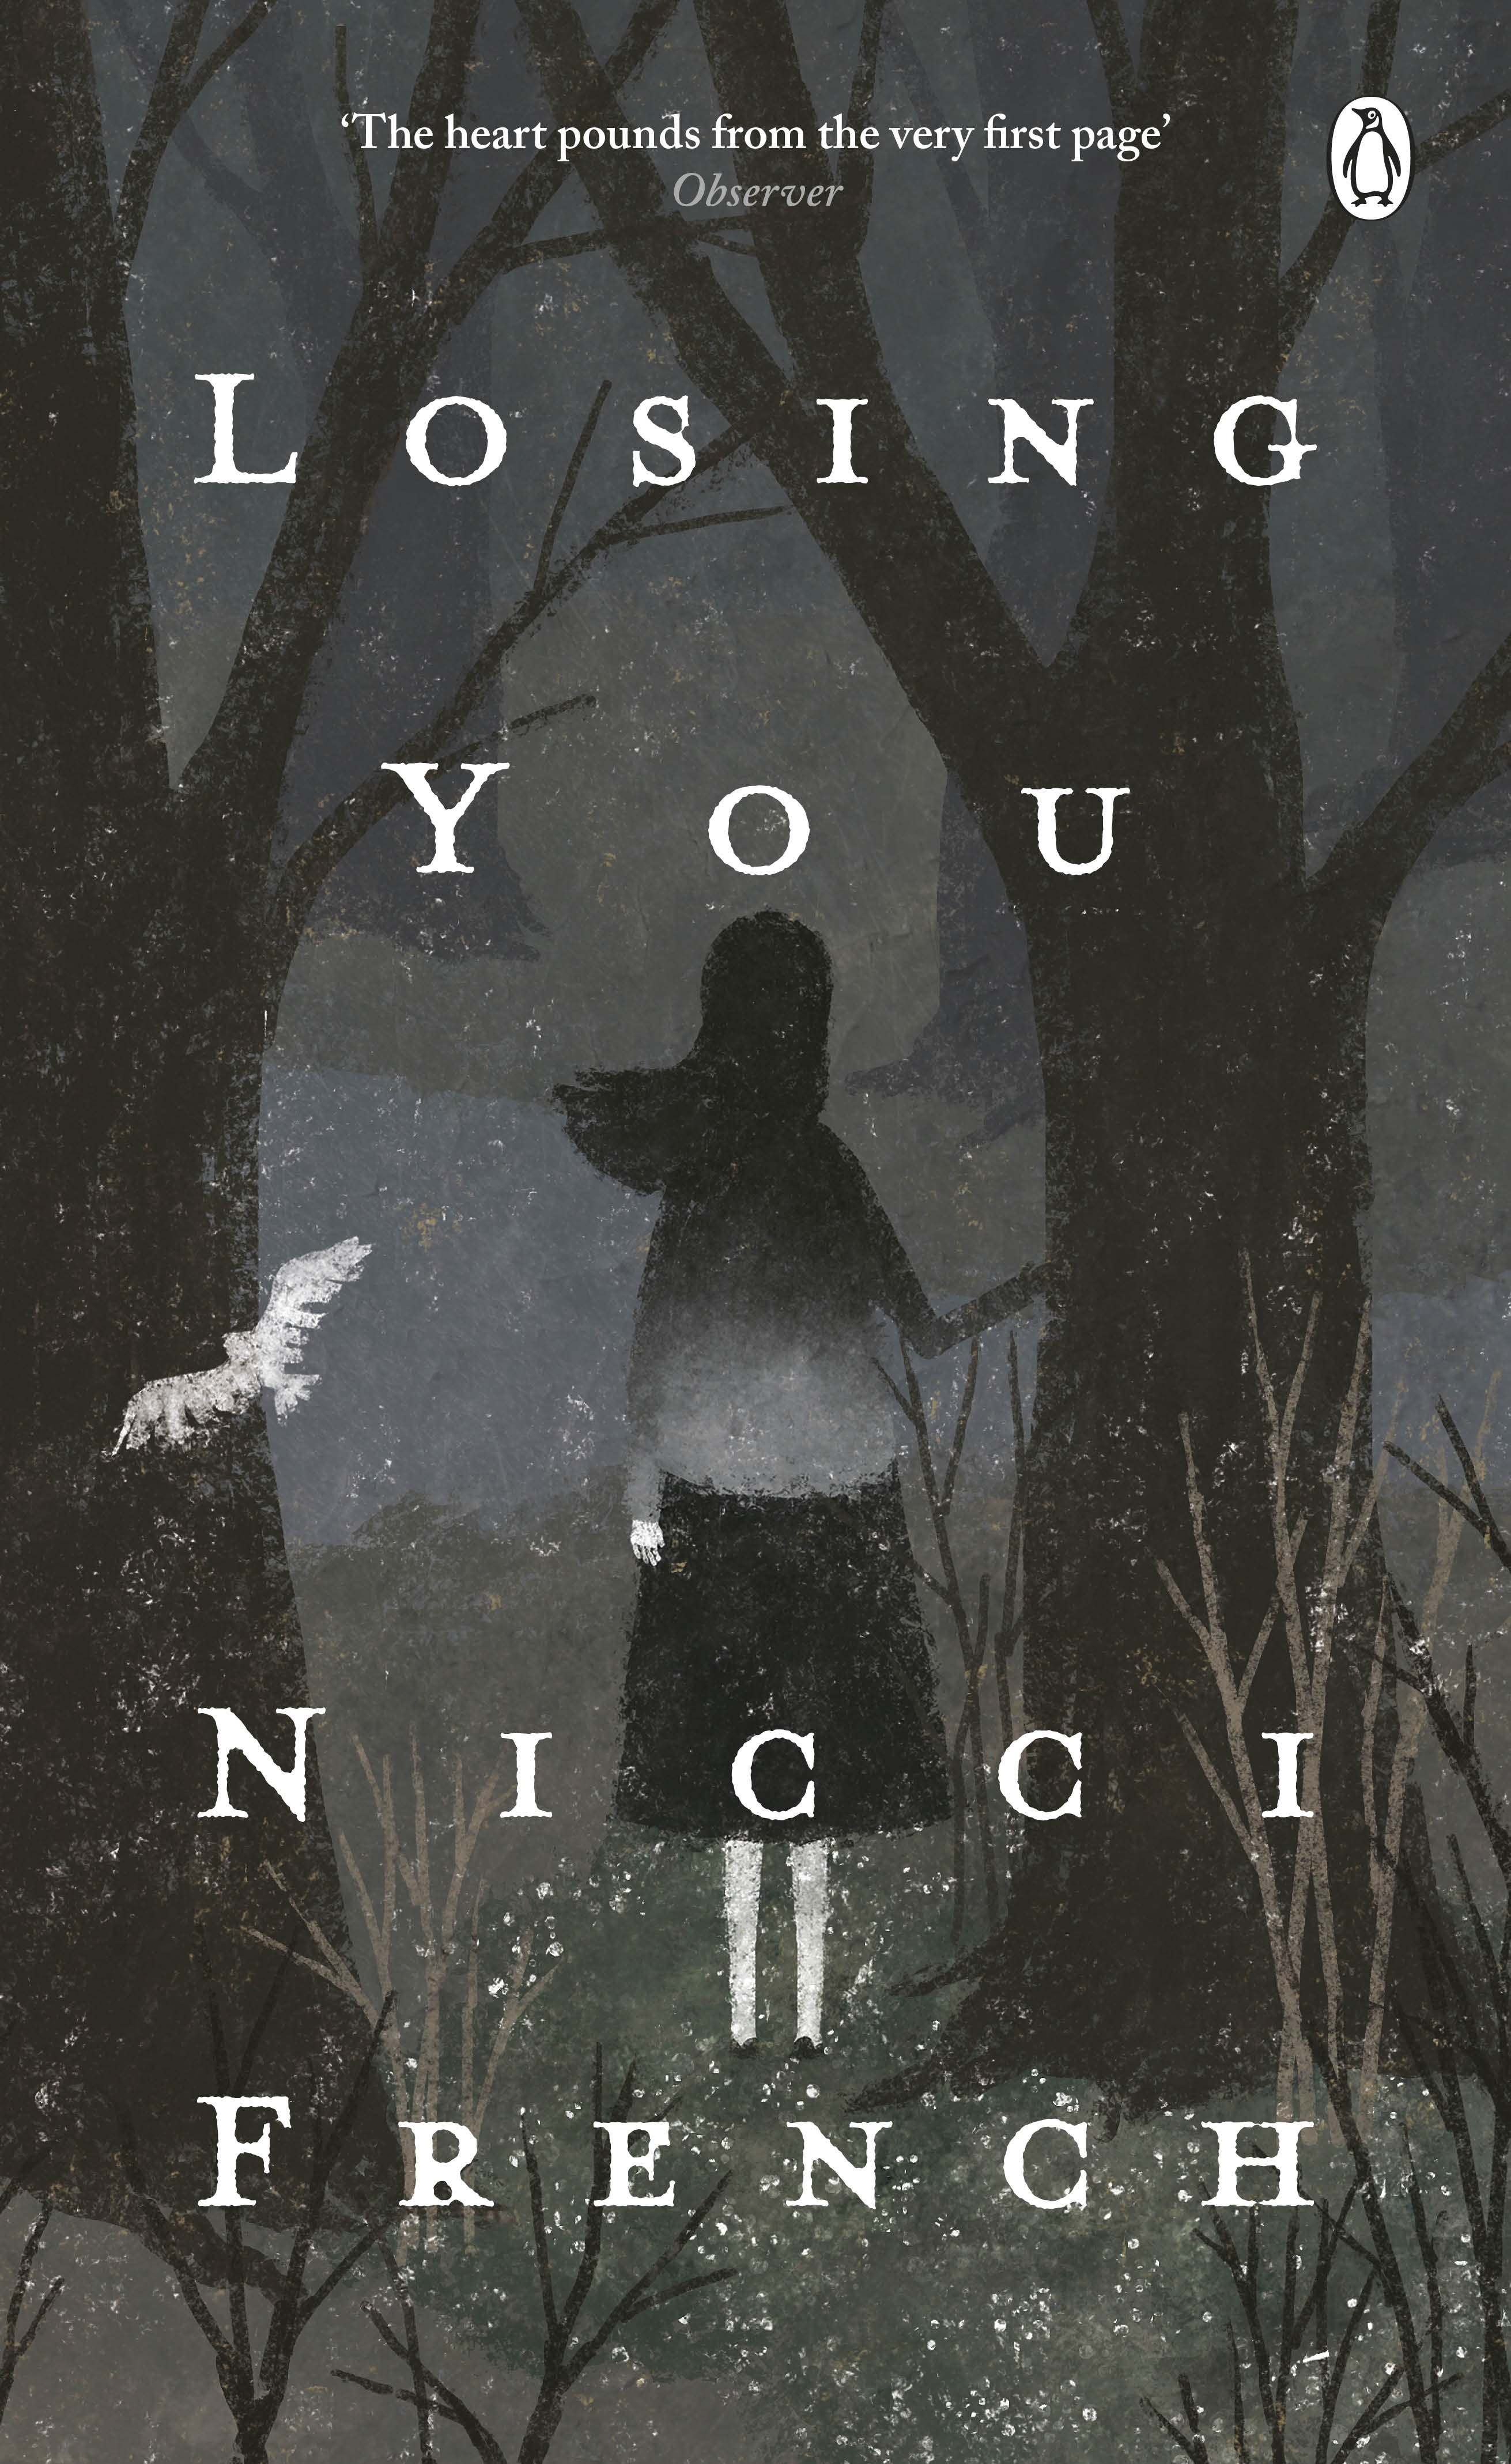 Book “Losing You” by Nicci French — July 25, 2019